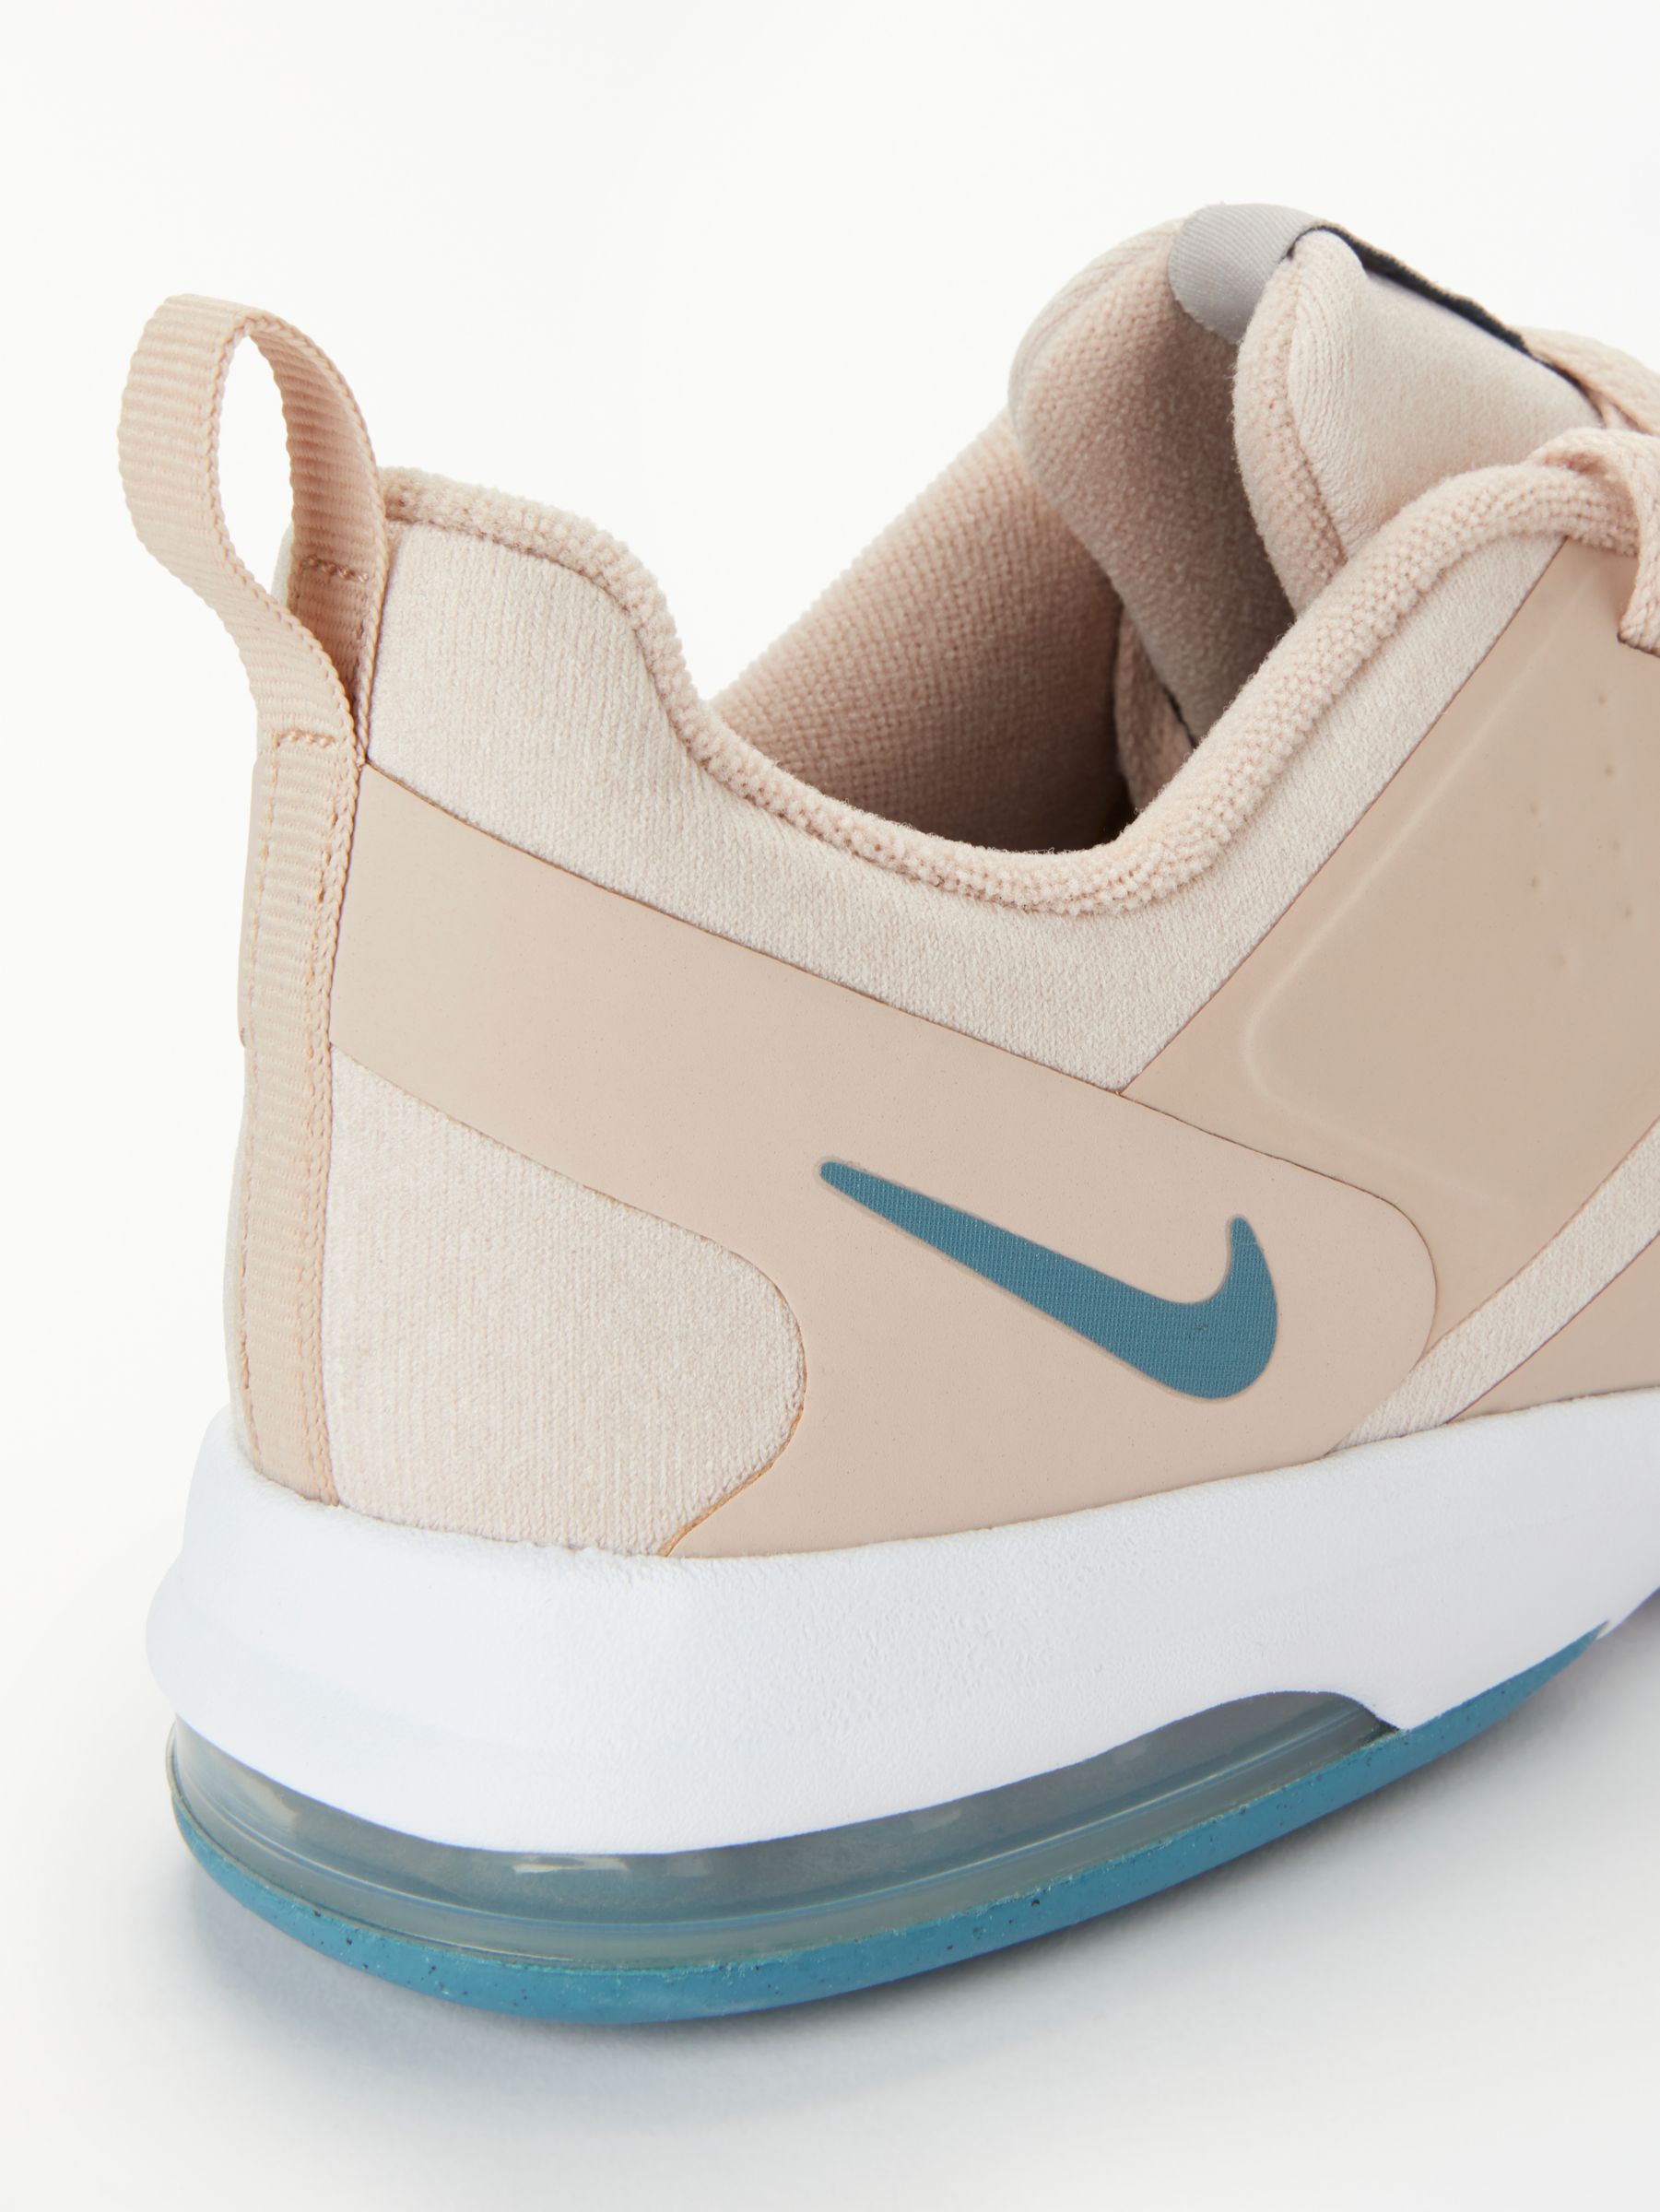 Nike Air Bella TR Women's Training Shoes, Particle Beige/Celestial  Teal/Guava Ice at John Lewis \u0026 Partners